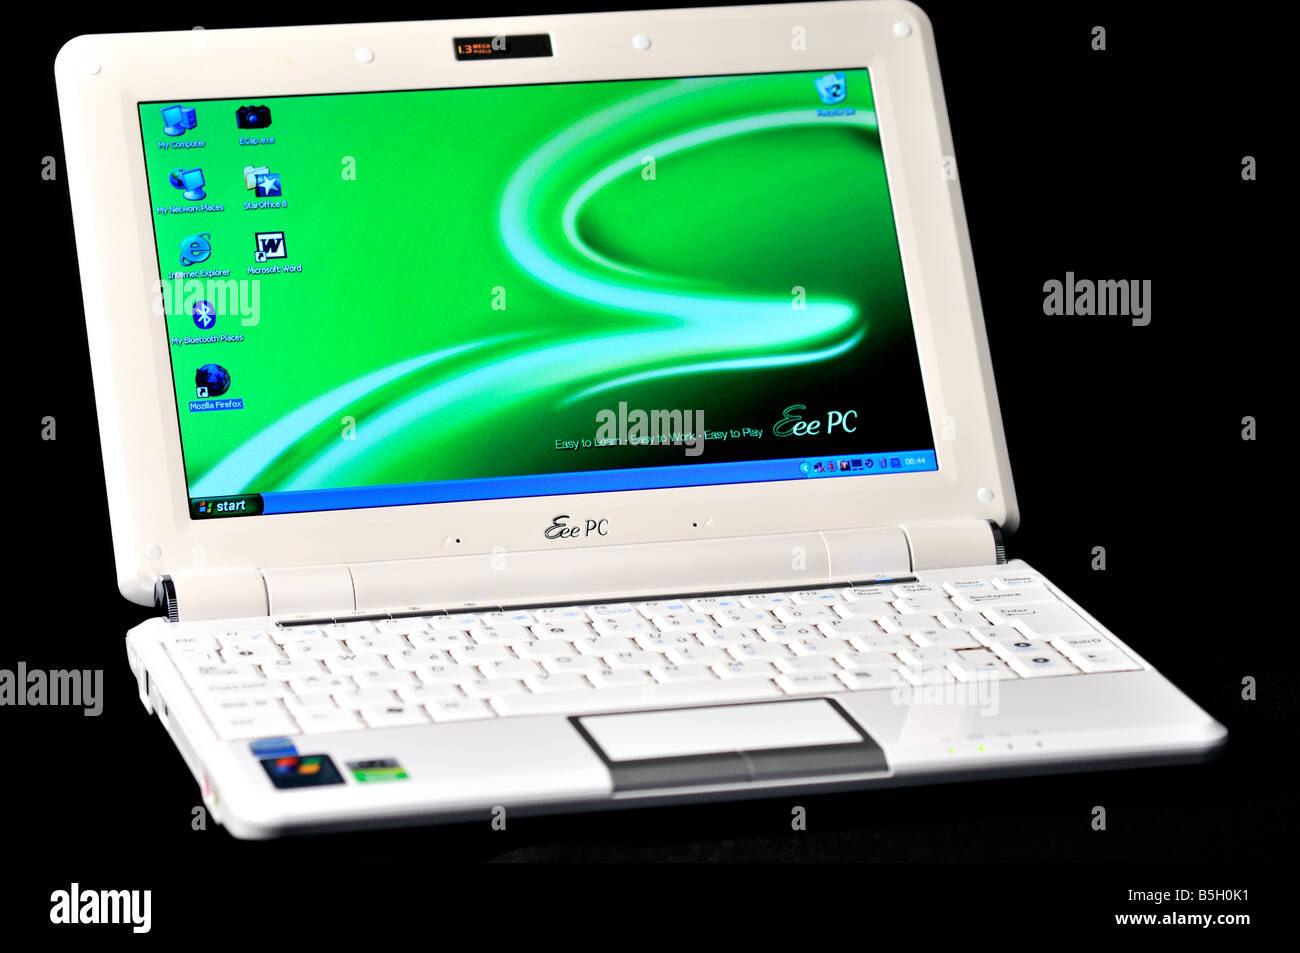 ASUS Eee PC showing keyboard and screen Stock Photo